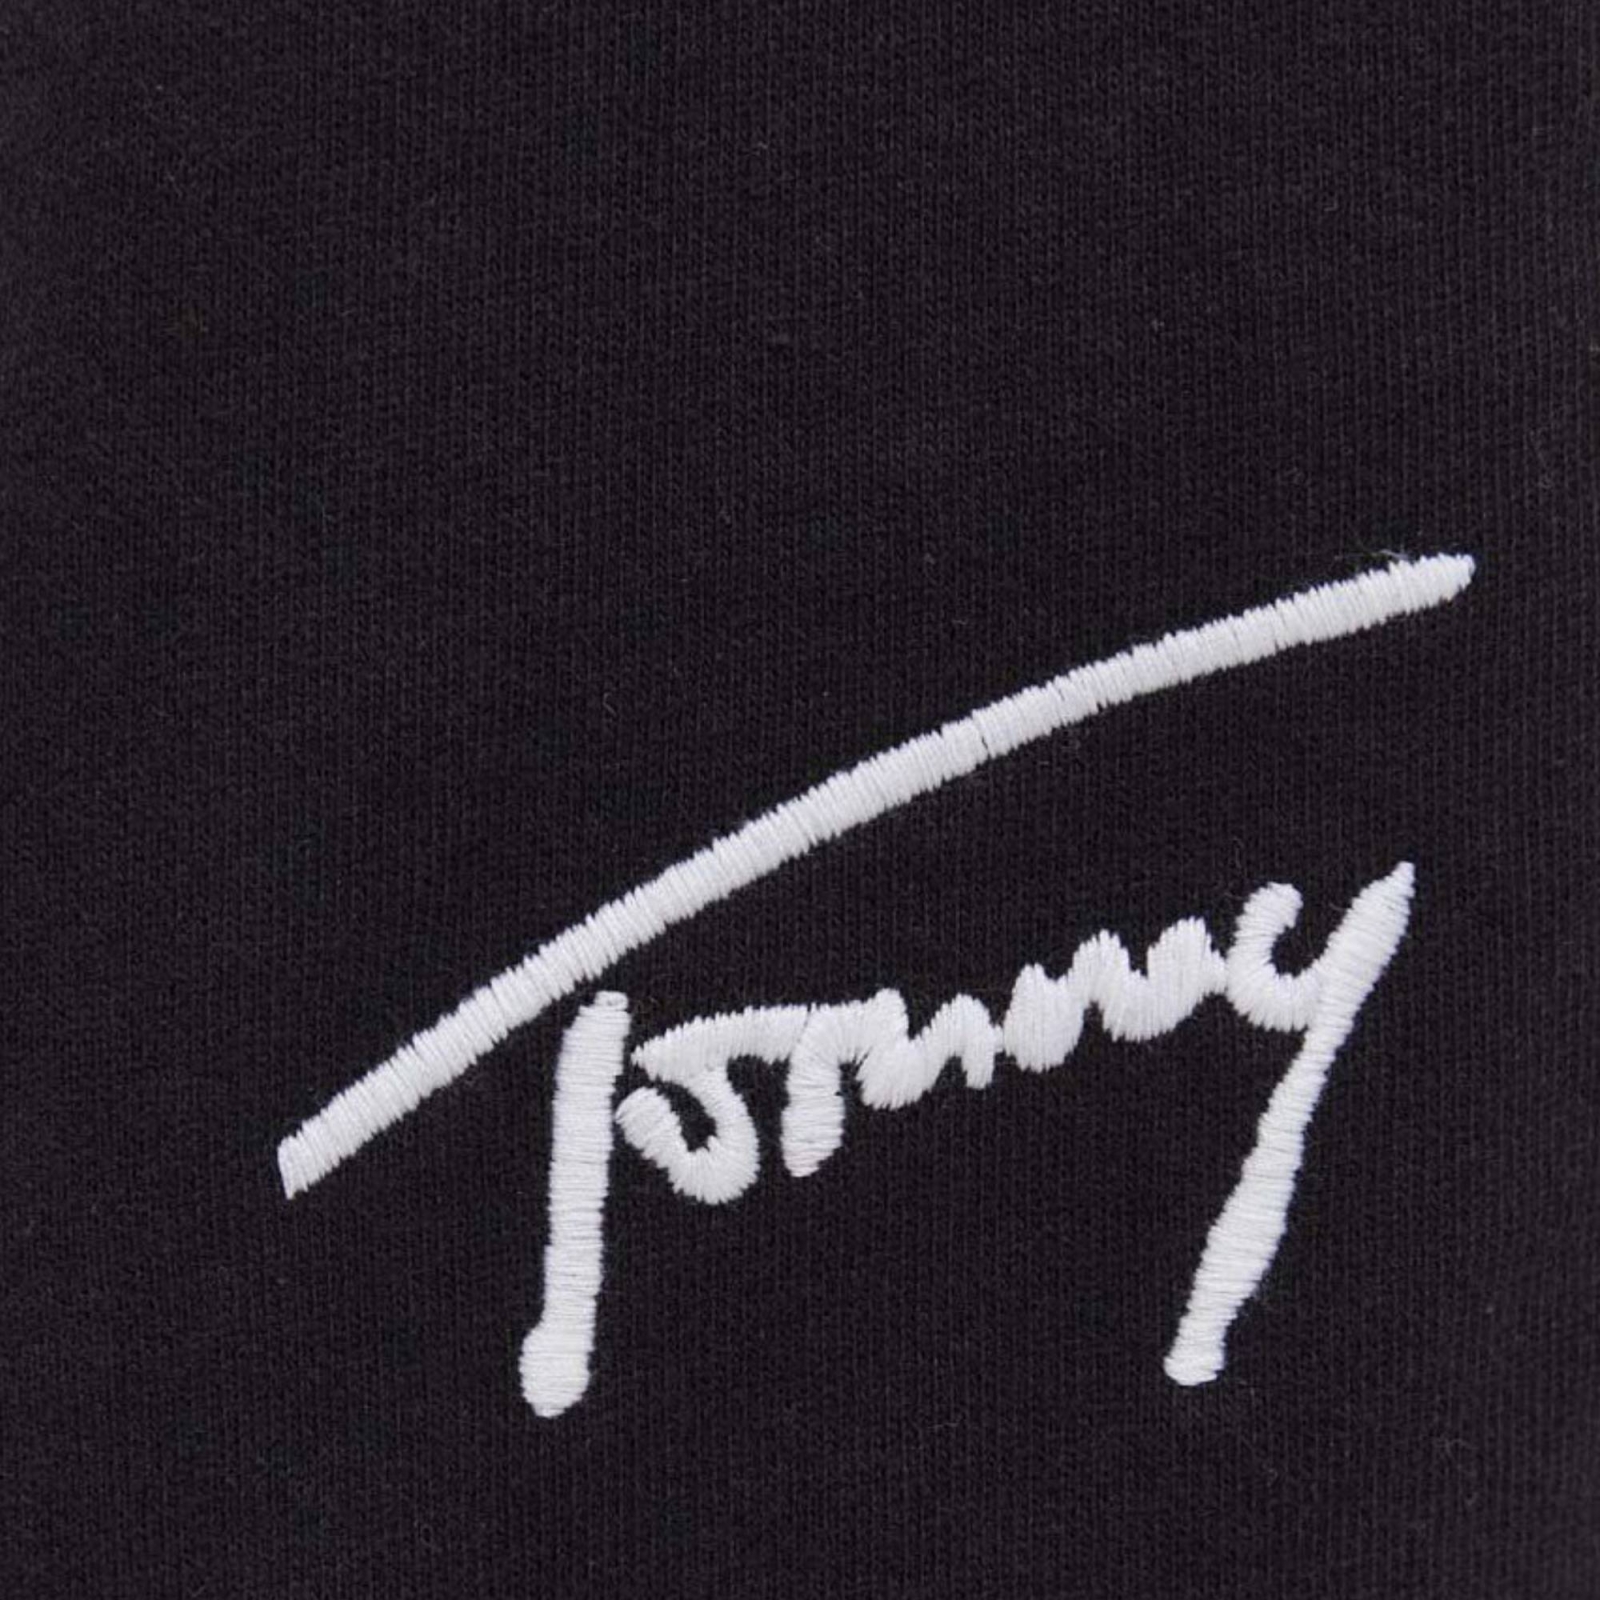 TOMMY RELAXED SIGNATURE SWEATPANT